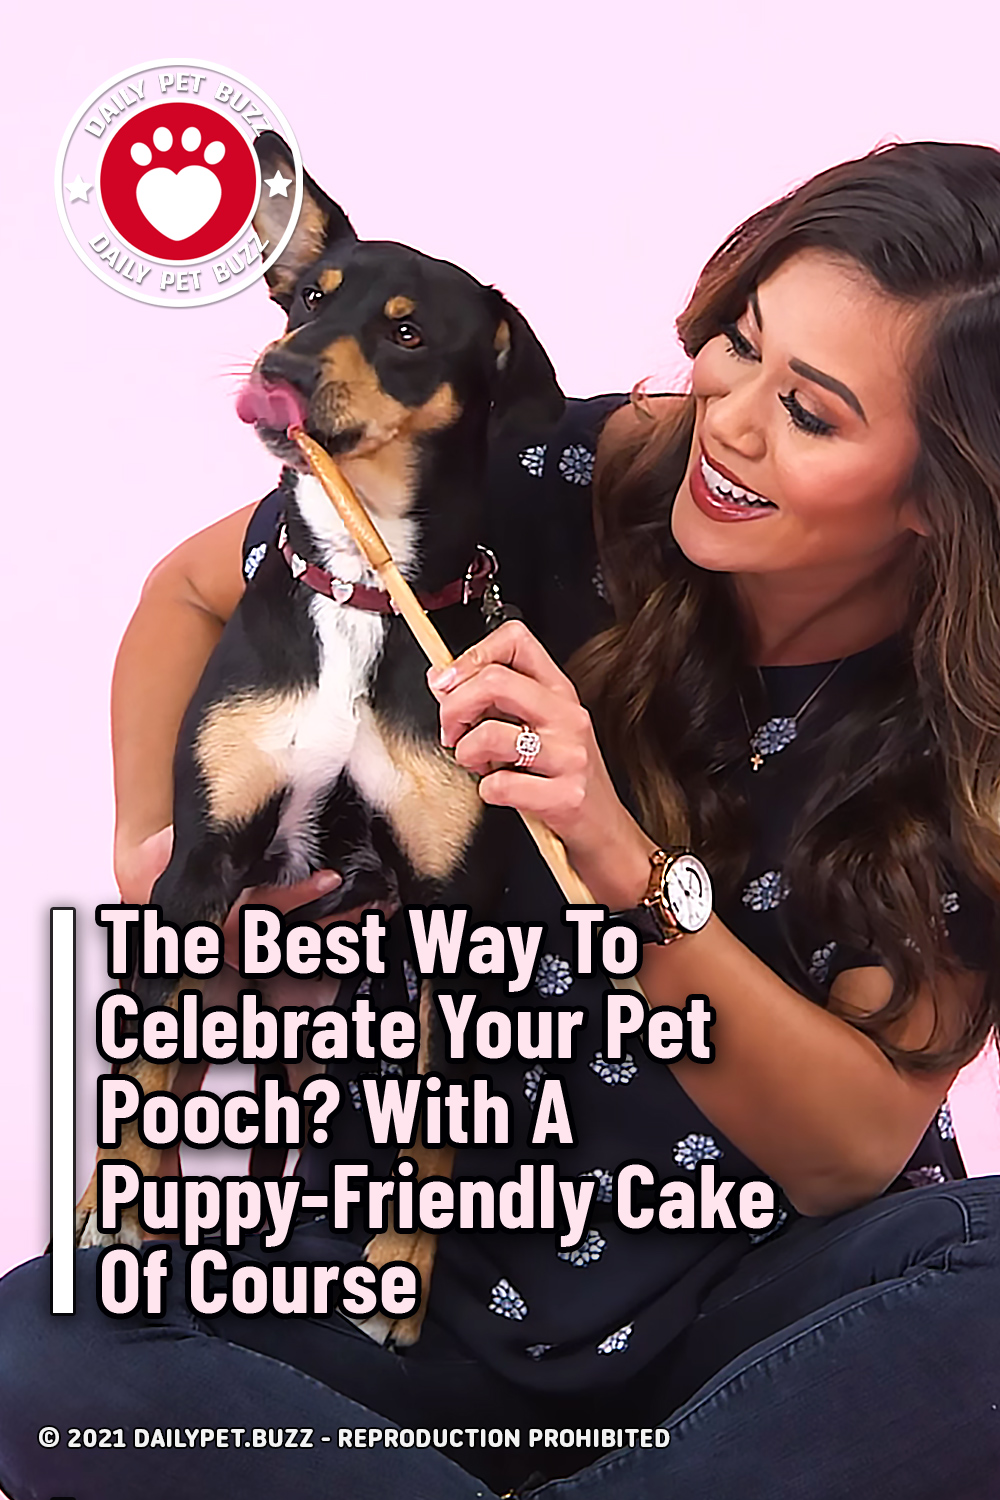 The Best Way To Celebrate Your Pet Pooch? With A Puppy-Friendly Cake Of Course